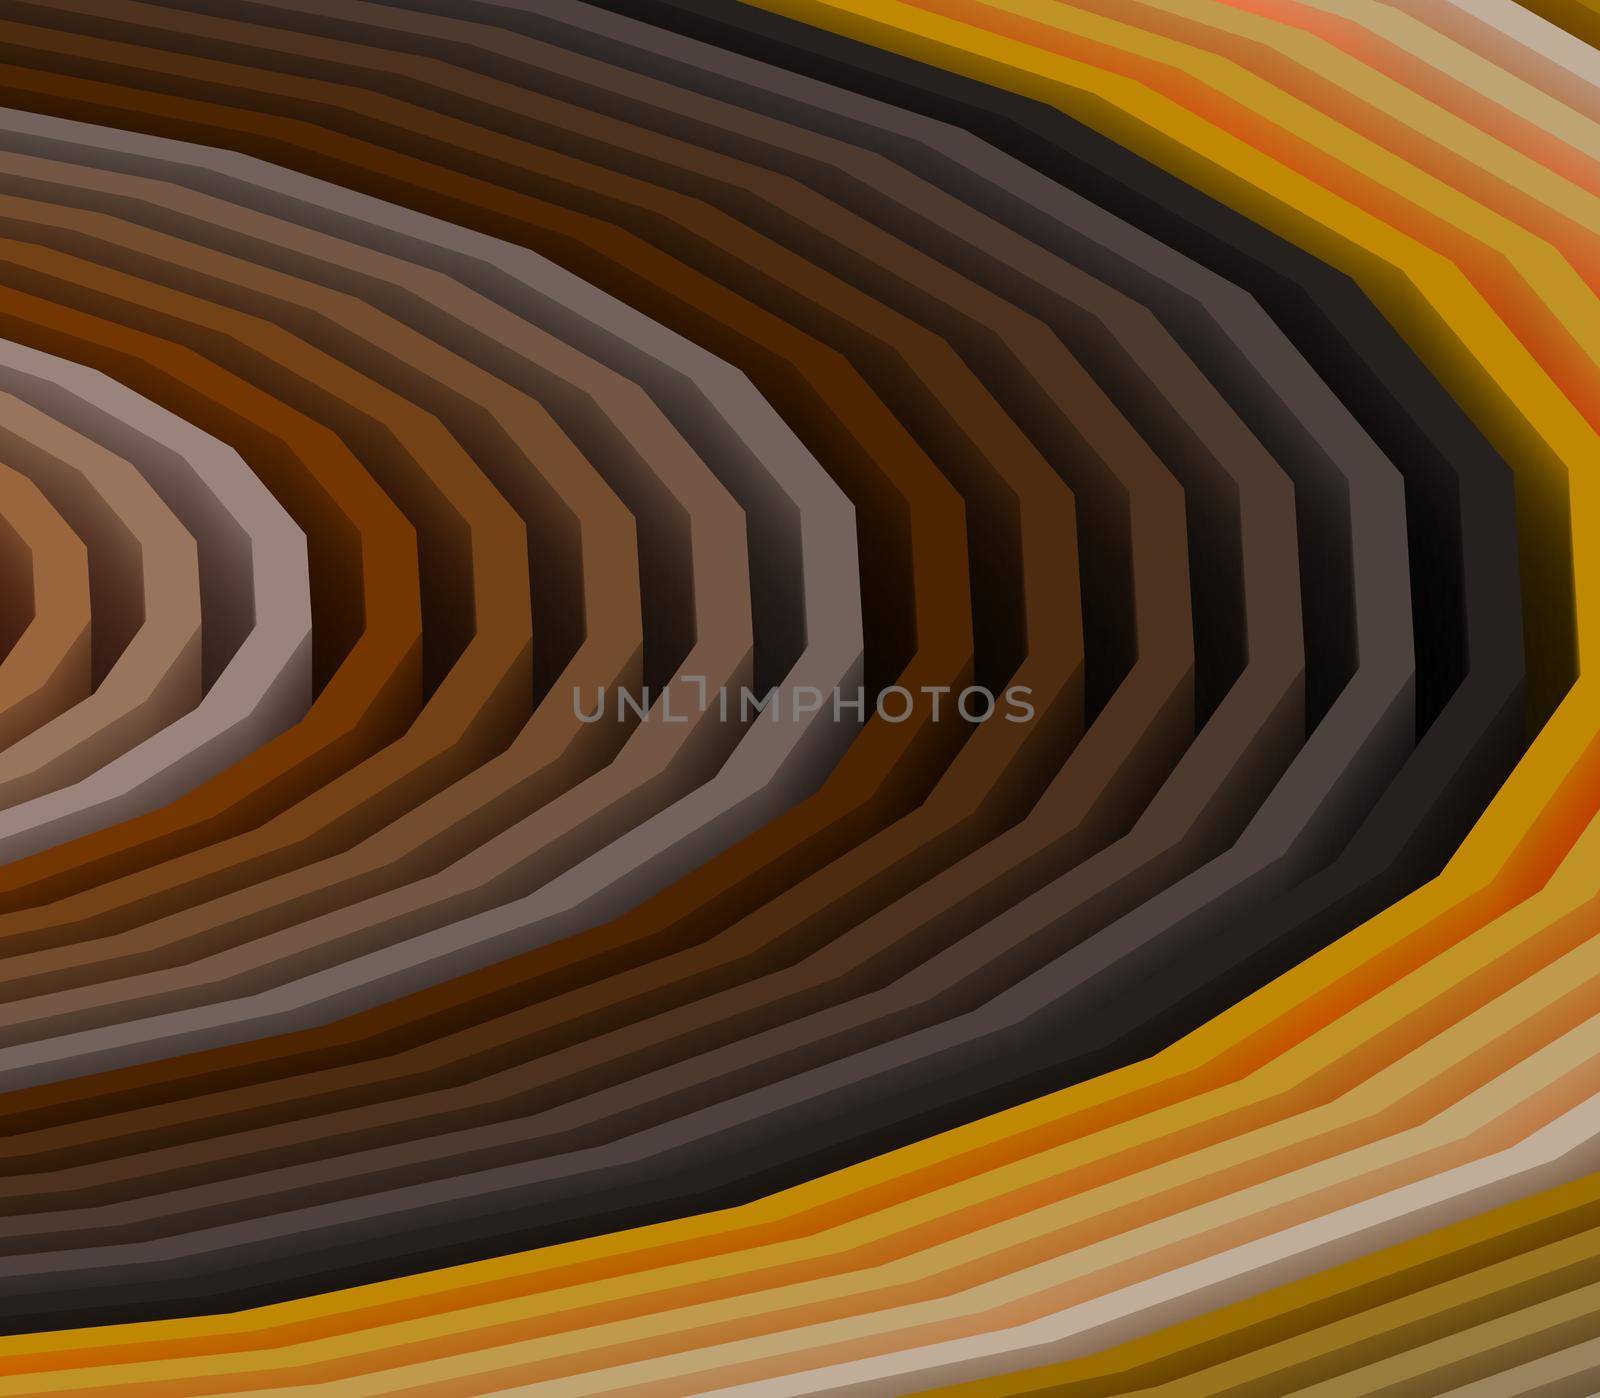 moving waves of colorful shades emerging from the left side of the image, created in 3D which shows a wave pattern of different different colors with their shades